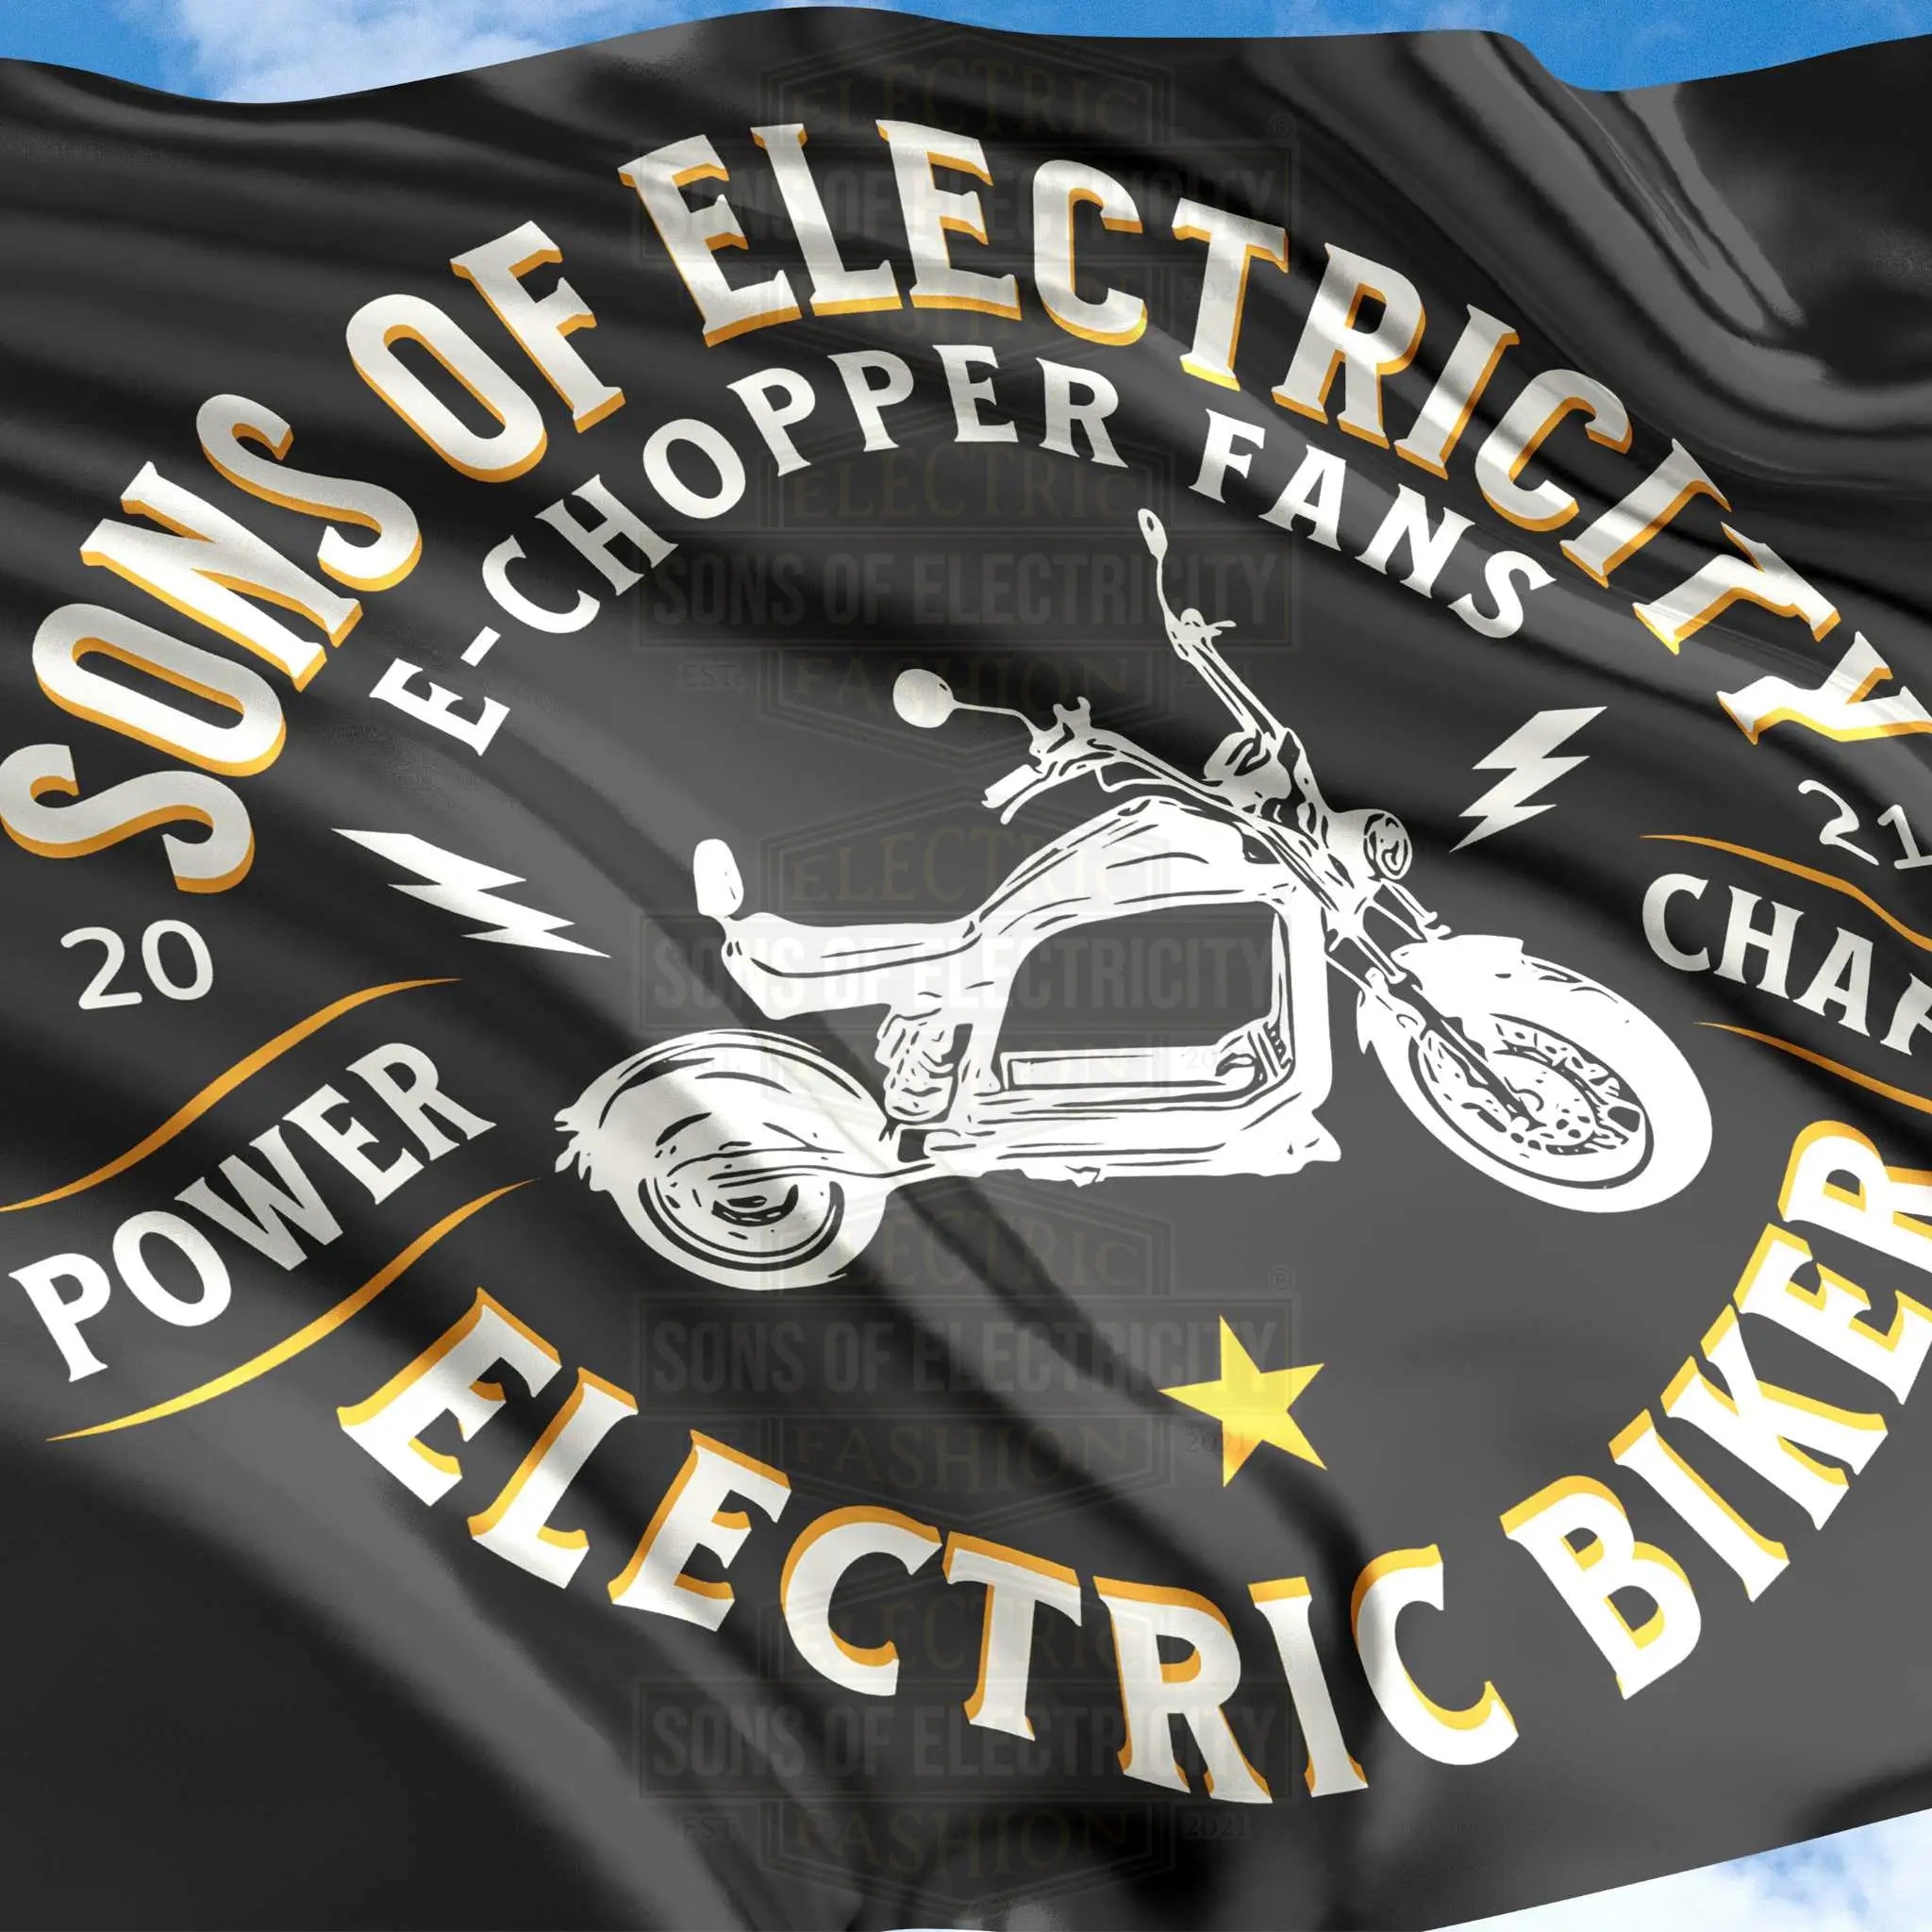 SONS OF ELECTRICITY Hiss-Fahne - E-Chopper (2) Fans Electric